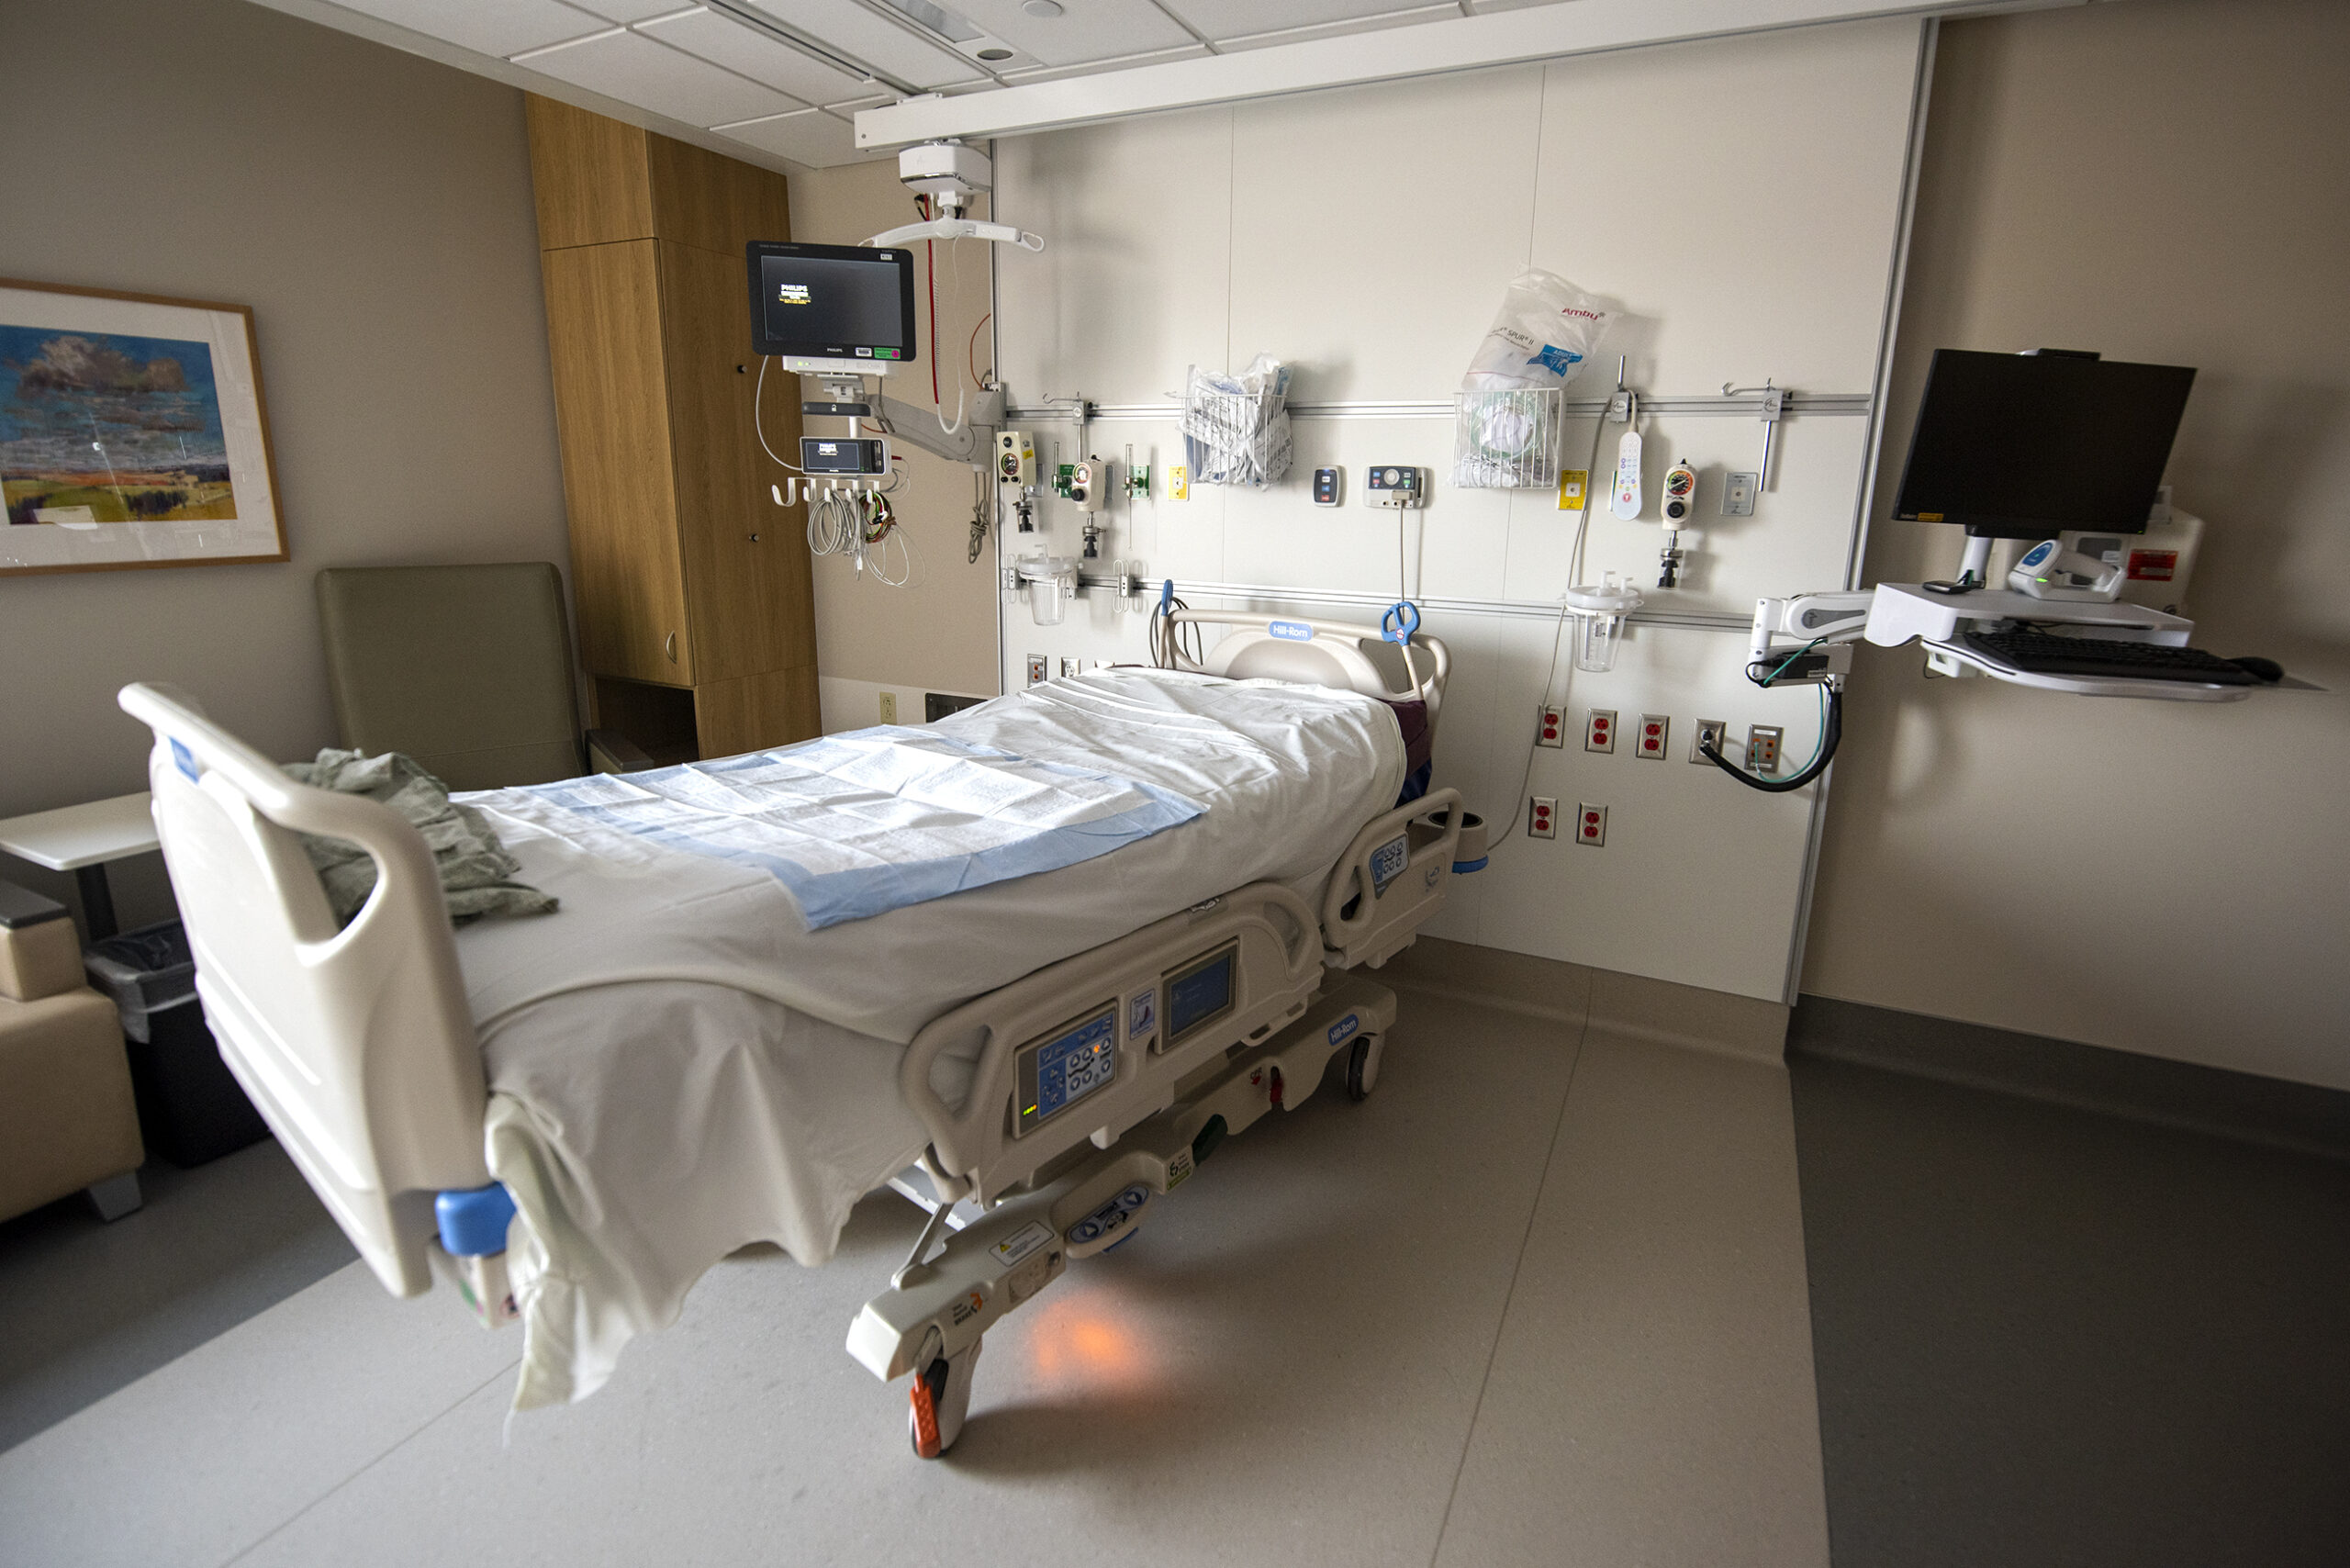 An empty hospital bed is surrounded by medical equipment.